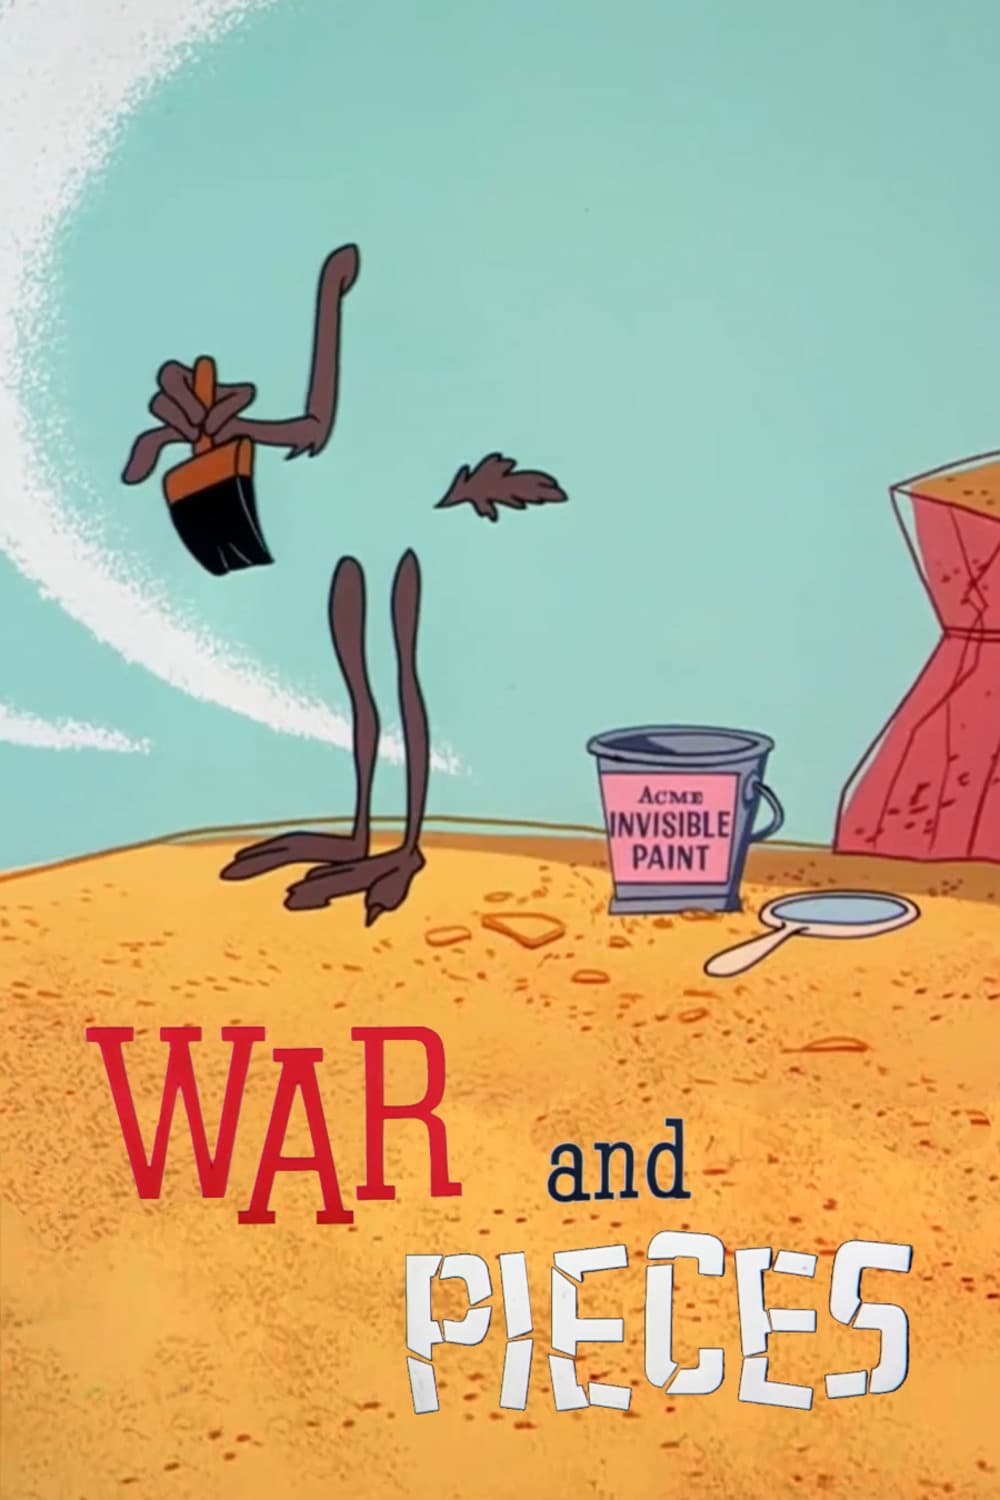 War and Pieces (1964)